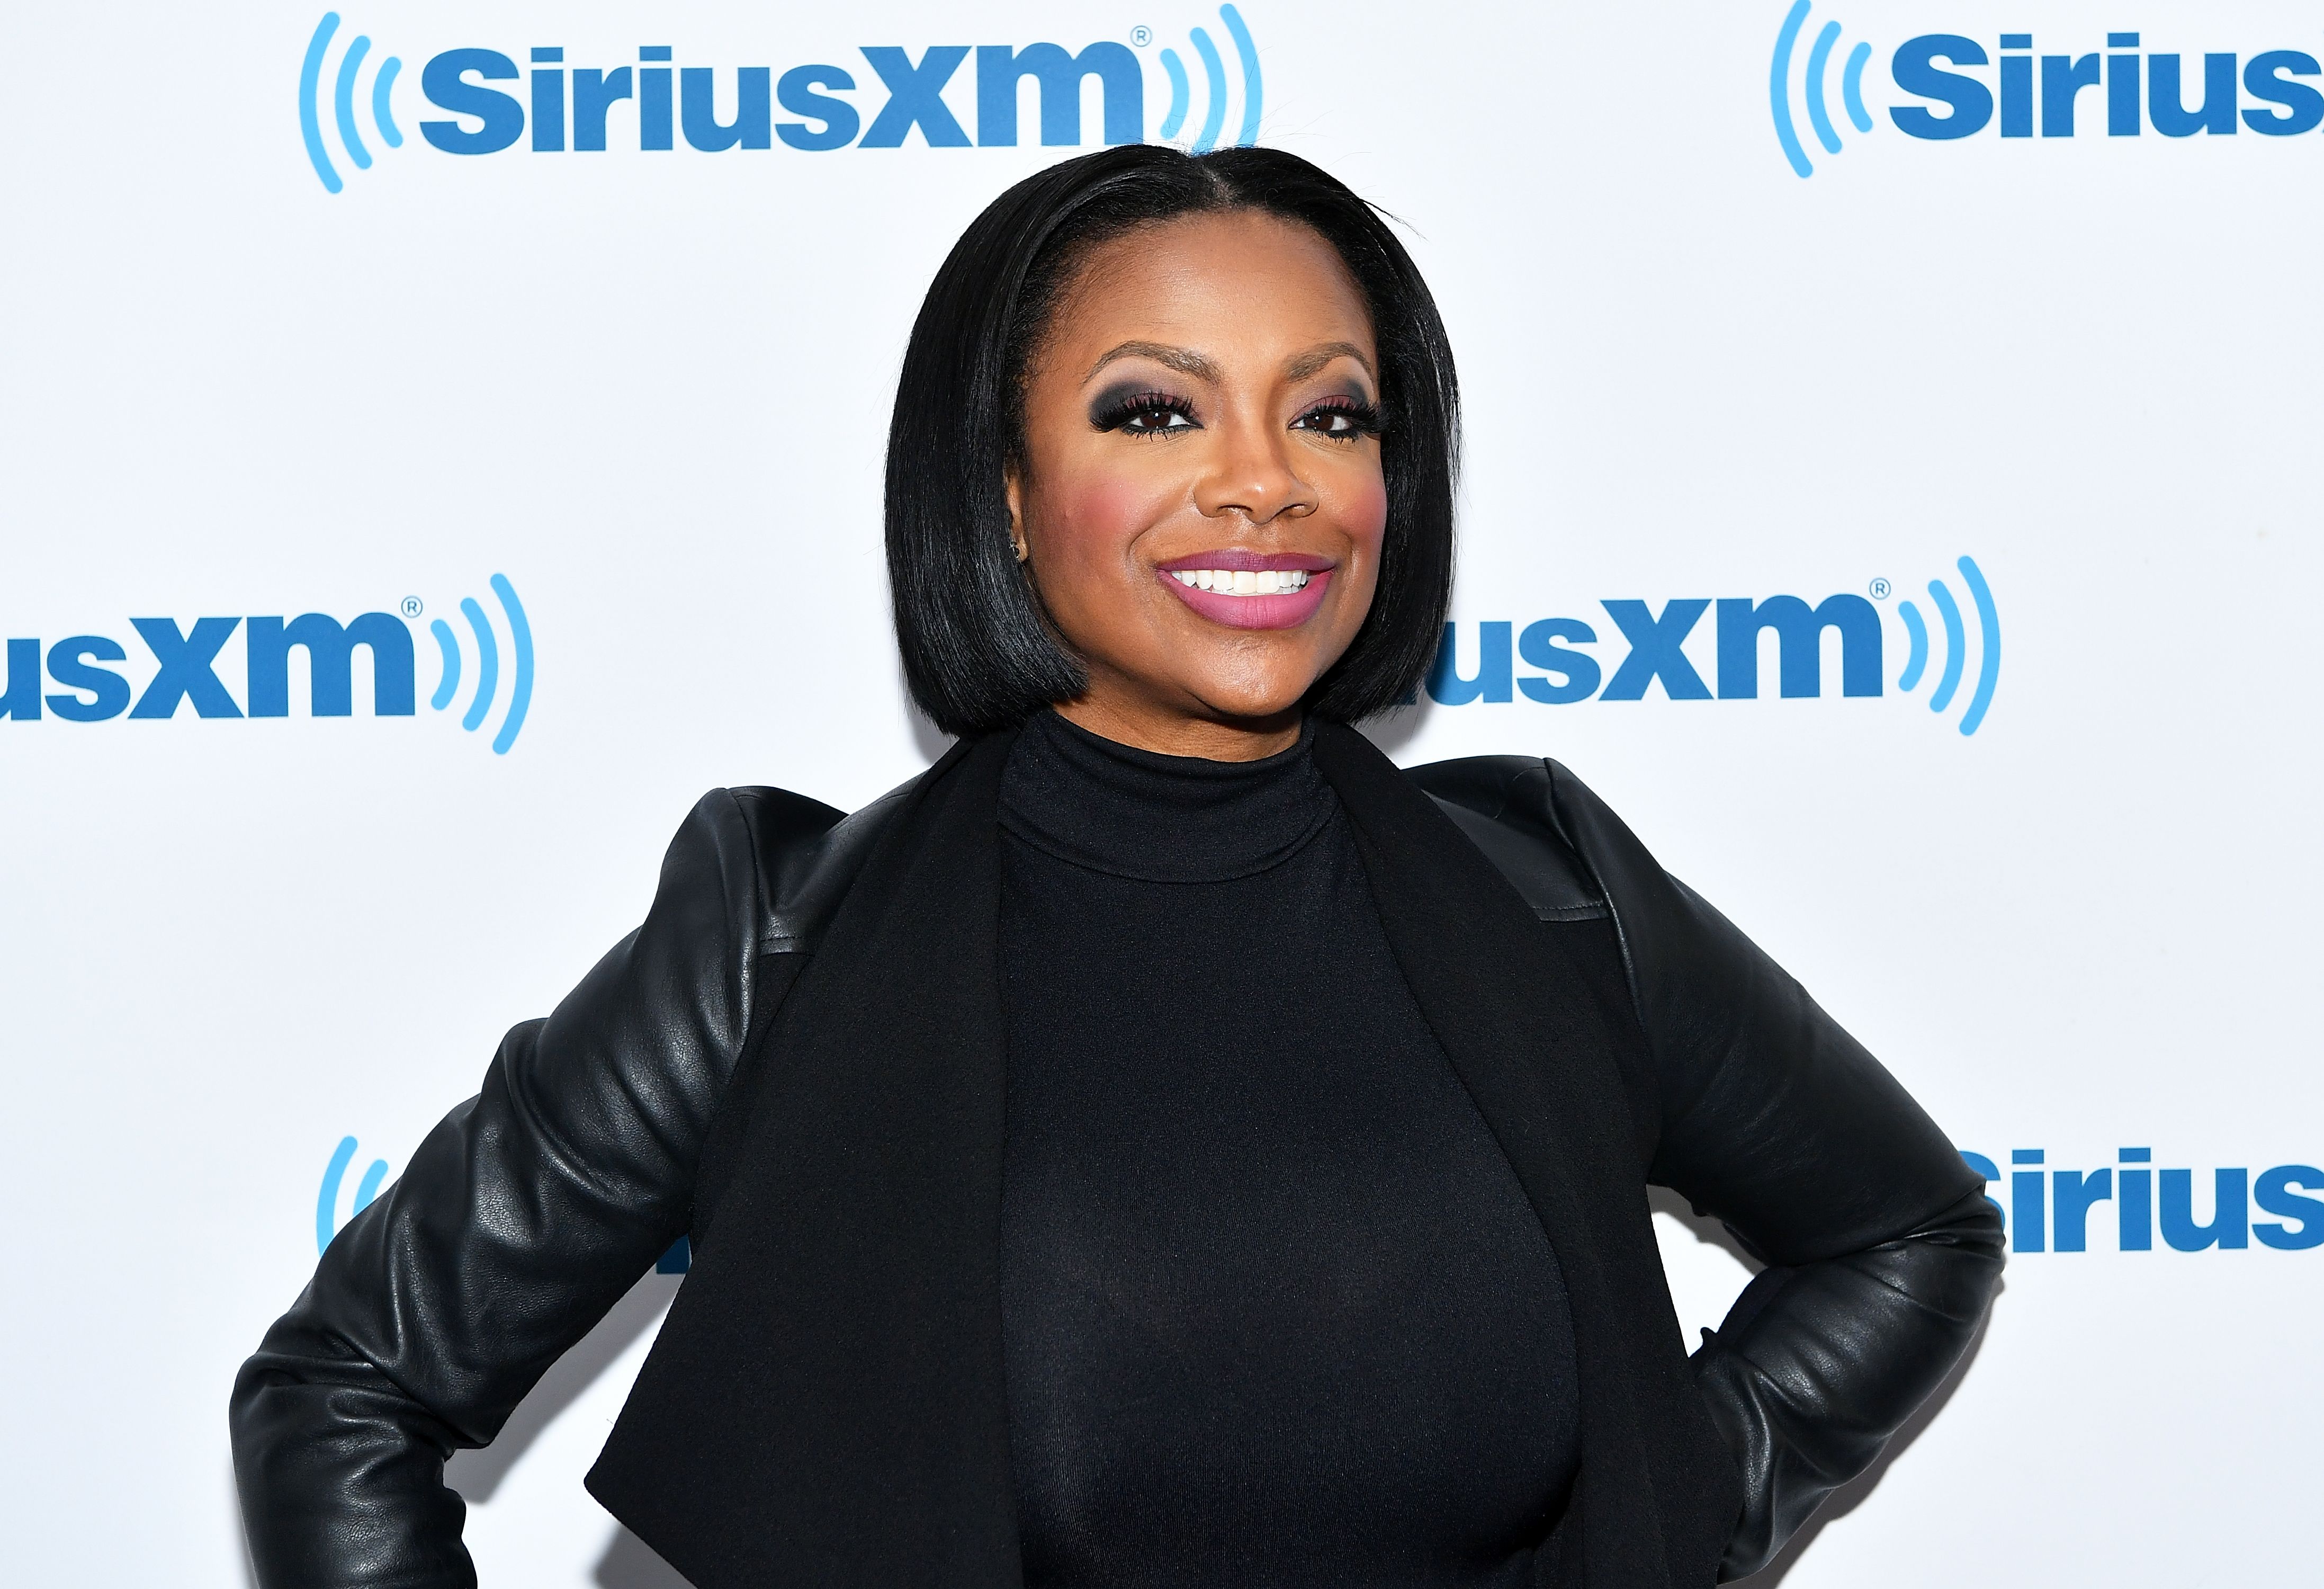 Singer/songwriter and TV personality Kandi Burruss at SiriusXM Studios on March 5, 2018 in New York City. | Photo: Getty Images